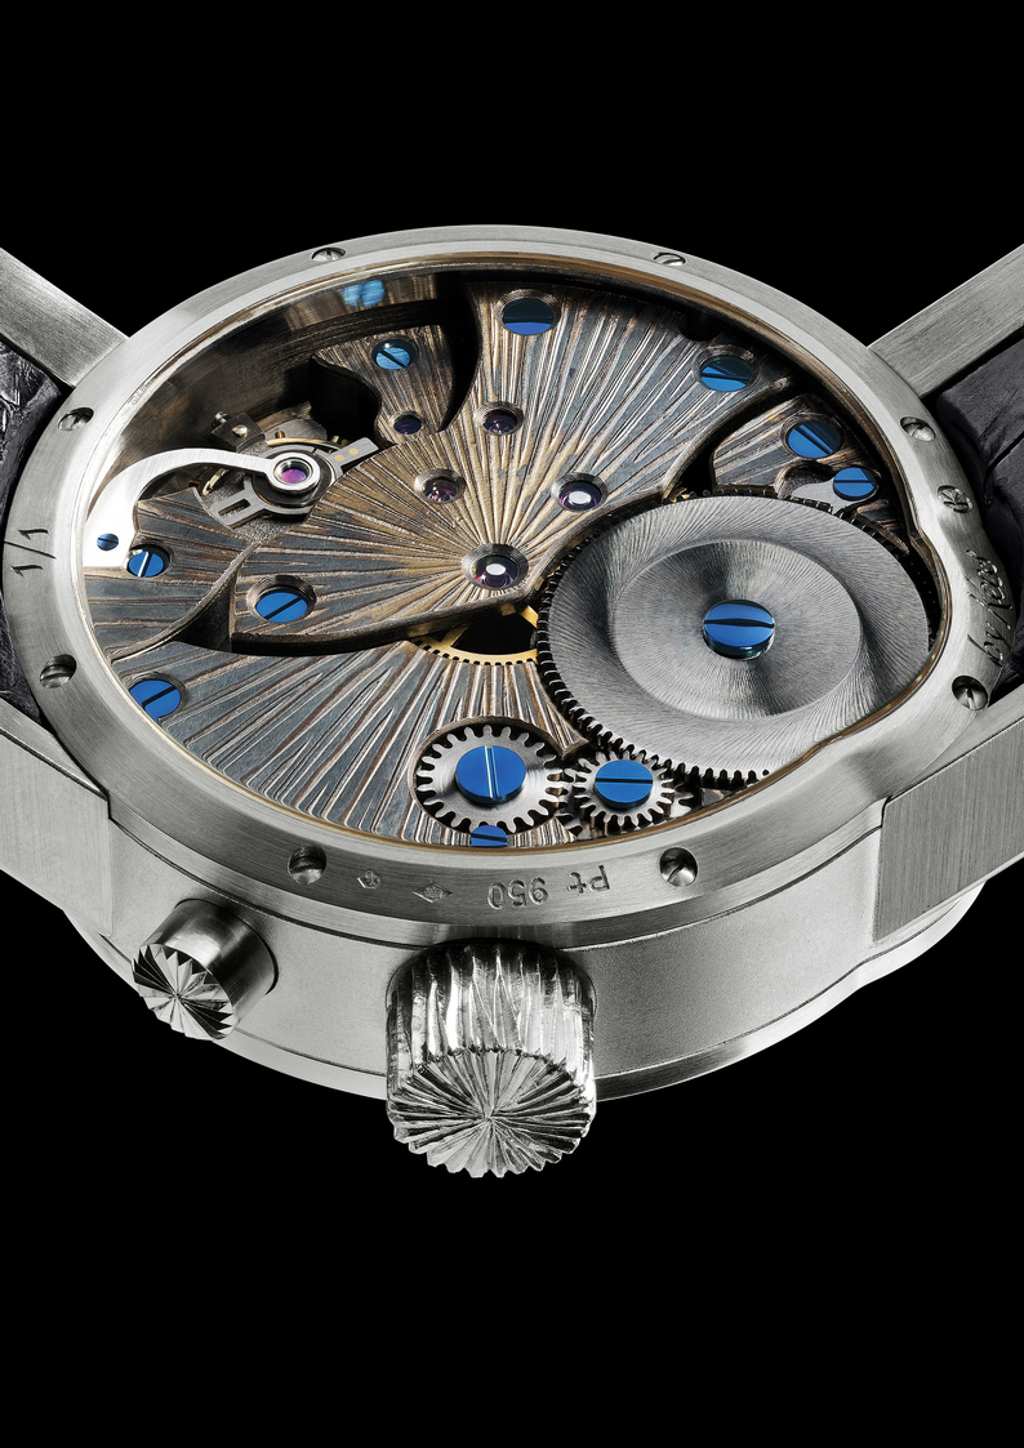 The movement of the watch, in which it features some interesting forms of finishing.